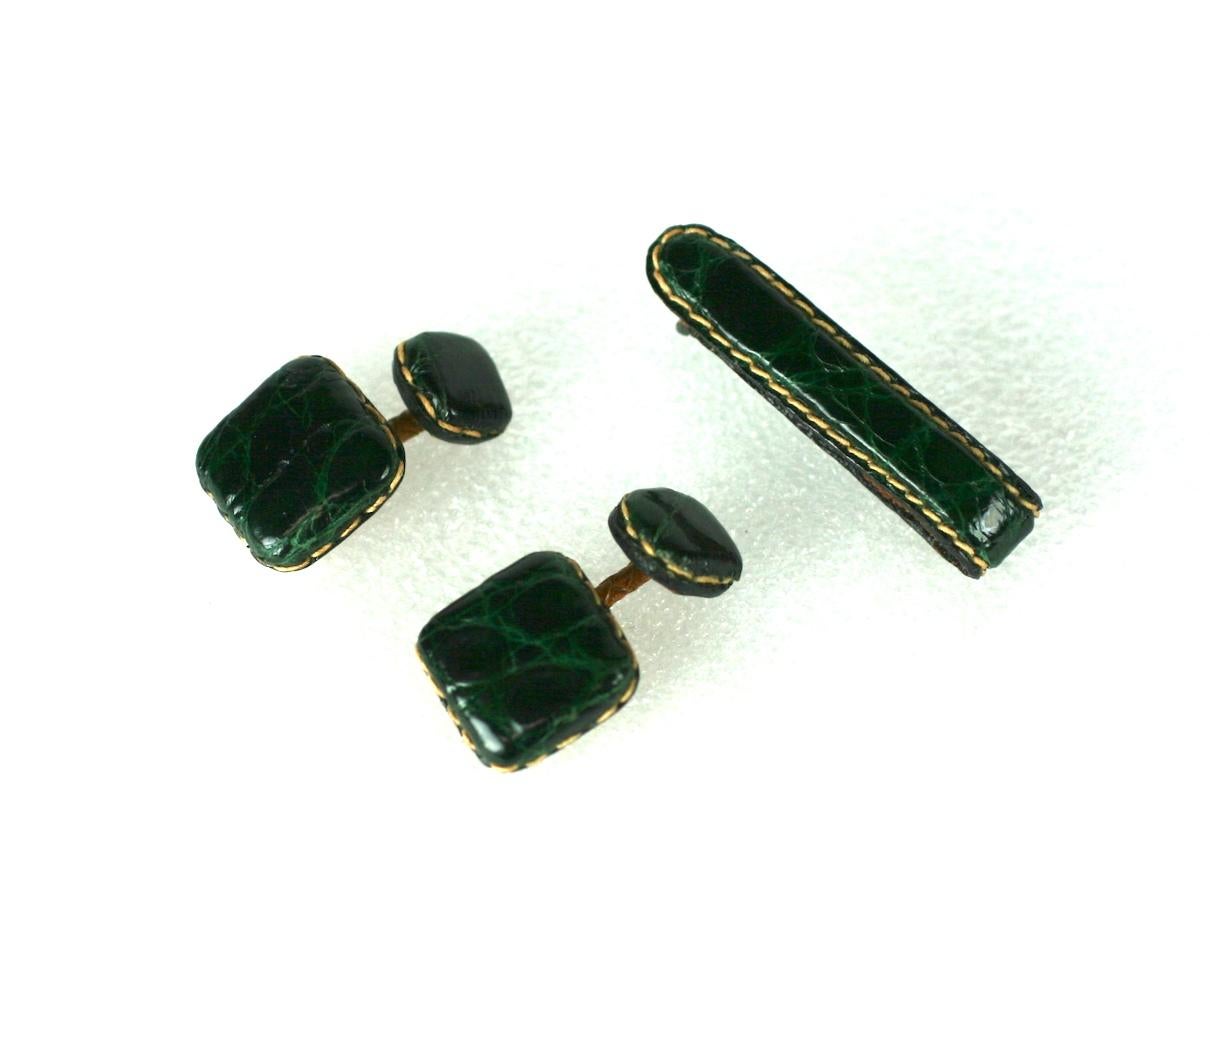 French forest green alligator cufflinks and tie bar set. Hand stitched, the cufflink shanks of finely braided leather.
Made in France. 1940's. Excellent Condition. 
Cufflinks
Length 1